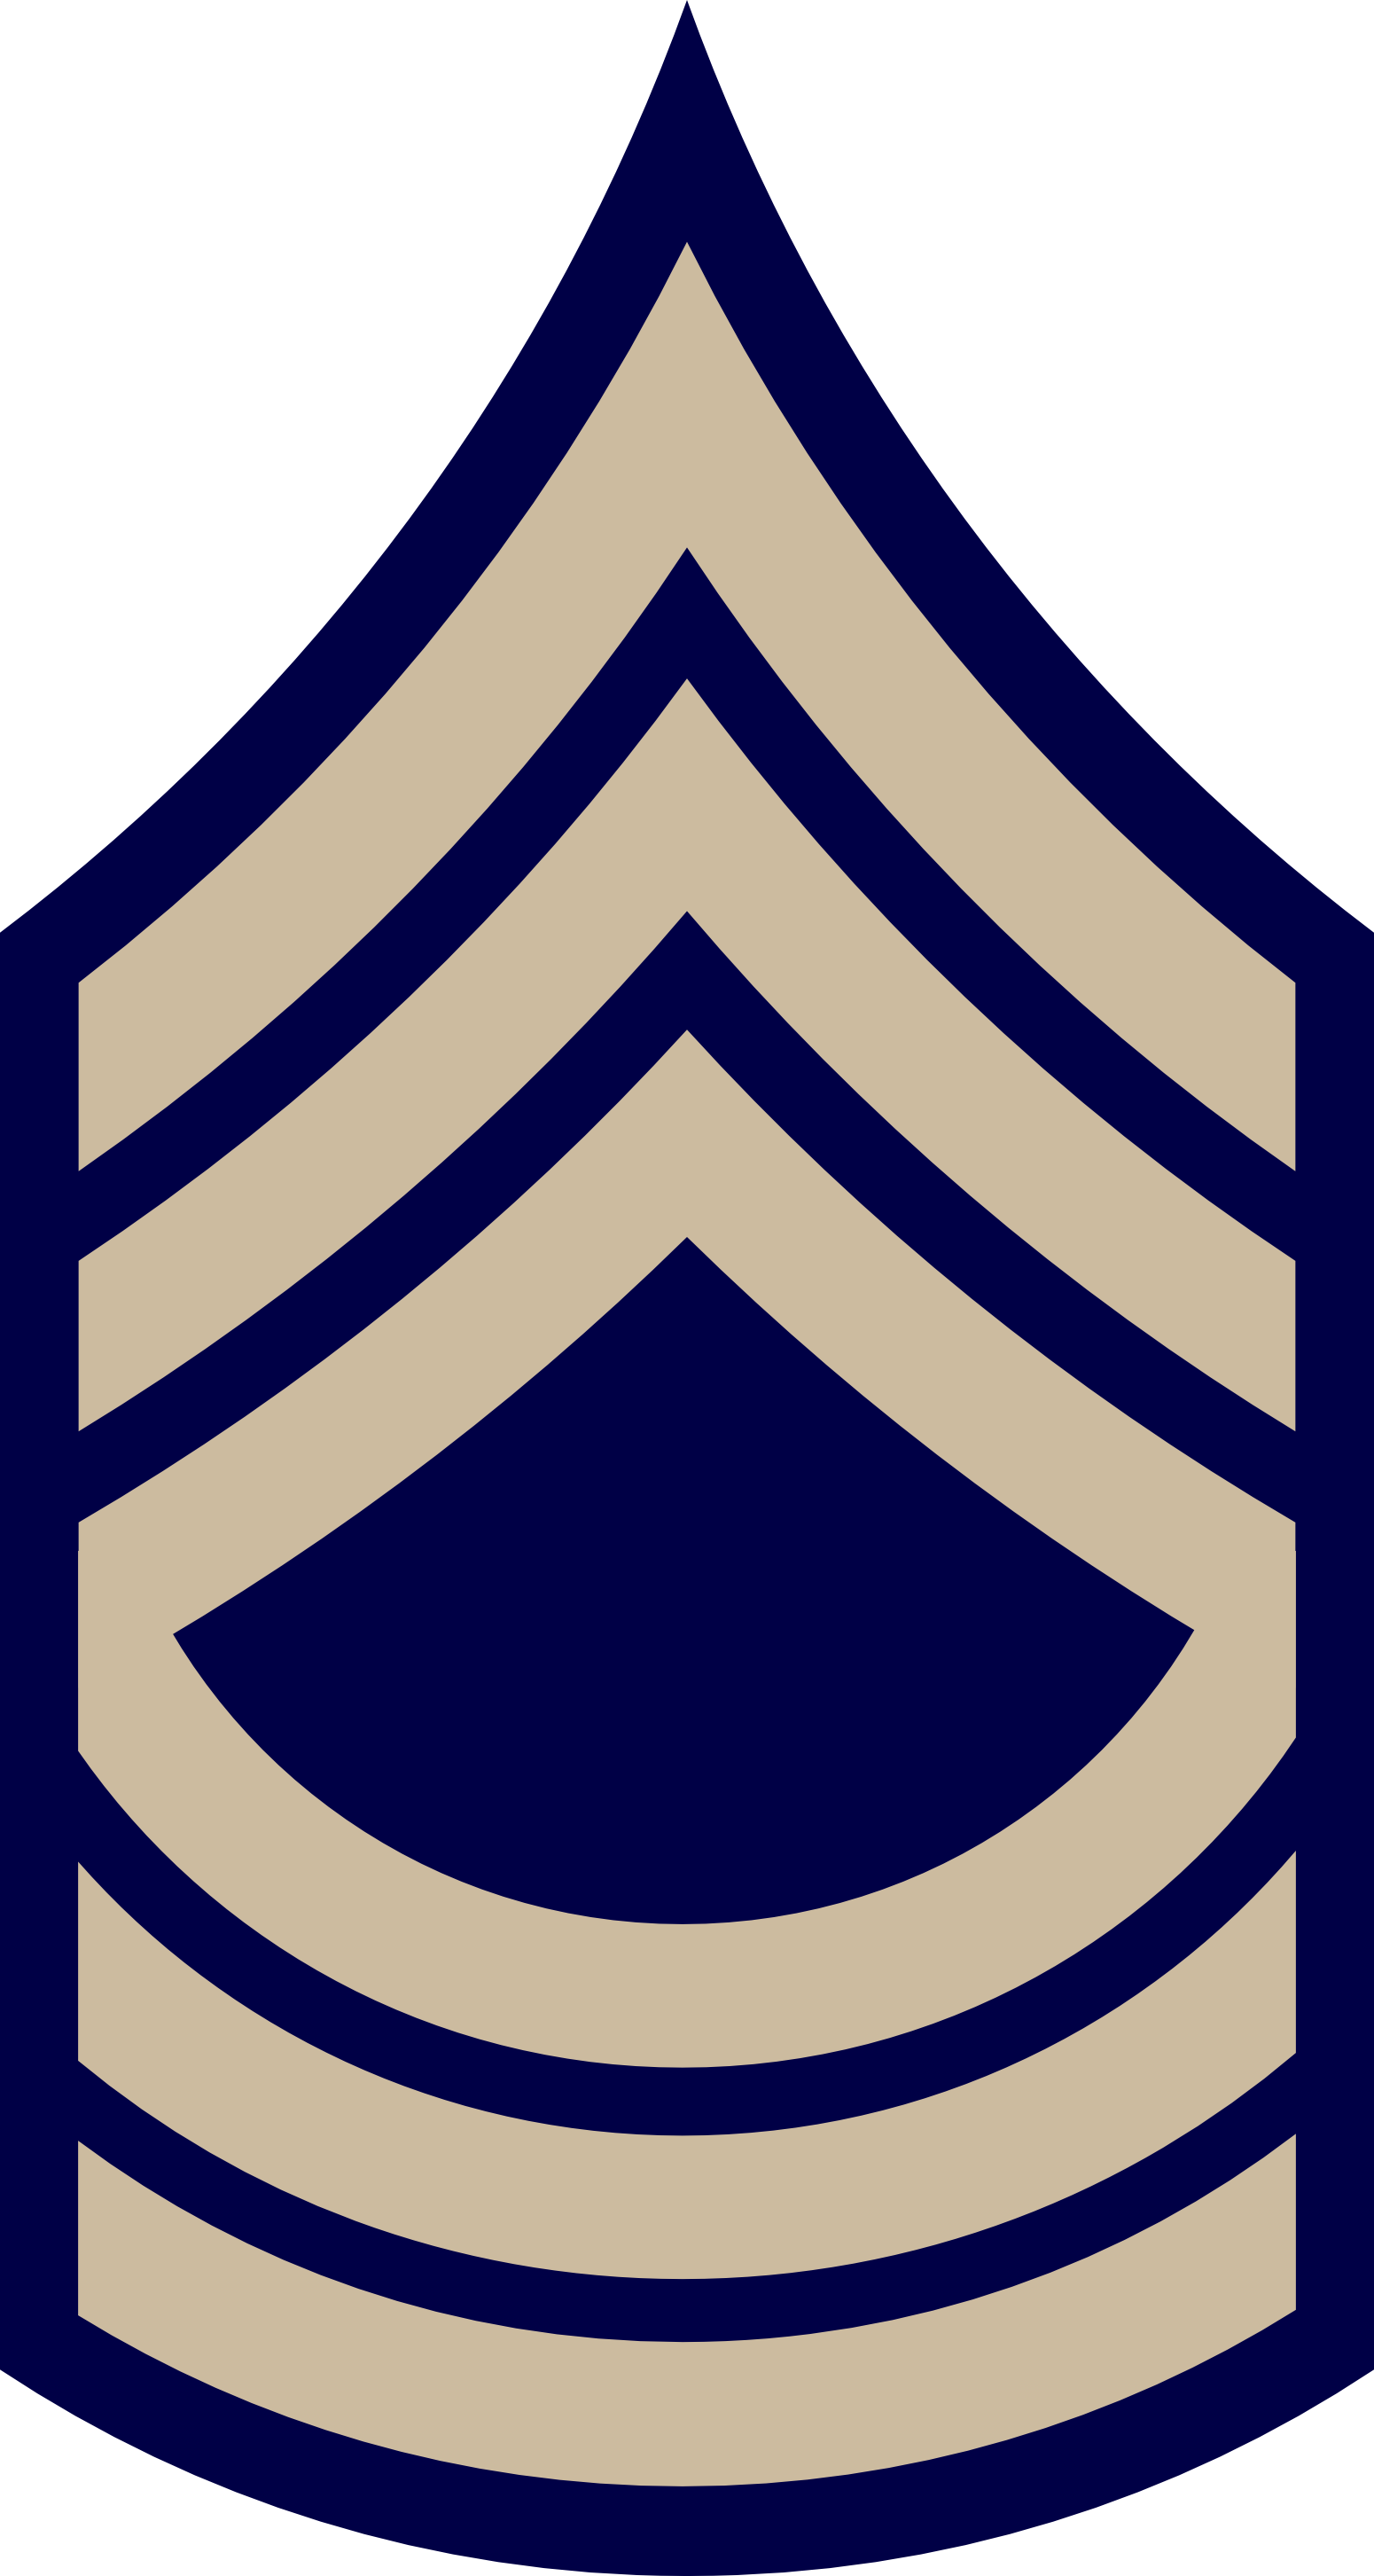 Master Sergeant - Master Sergeant Army Enlisted Ranks (1550x2905)